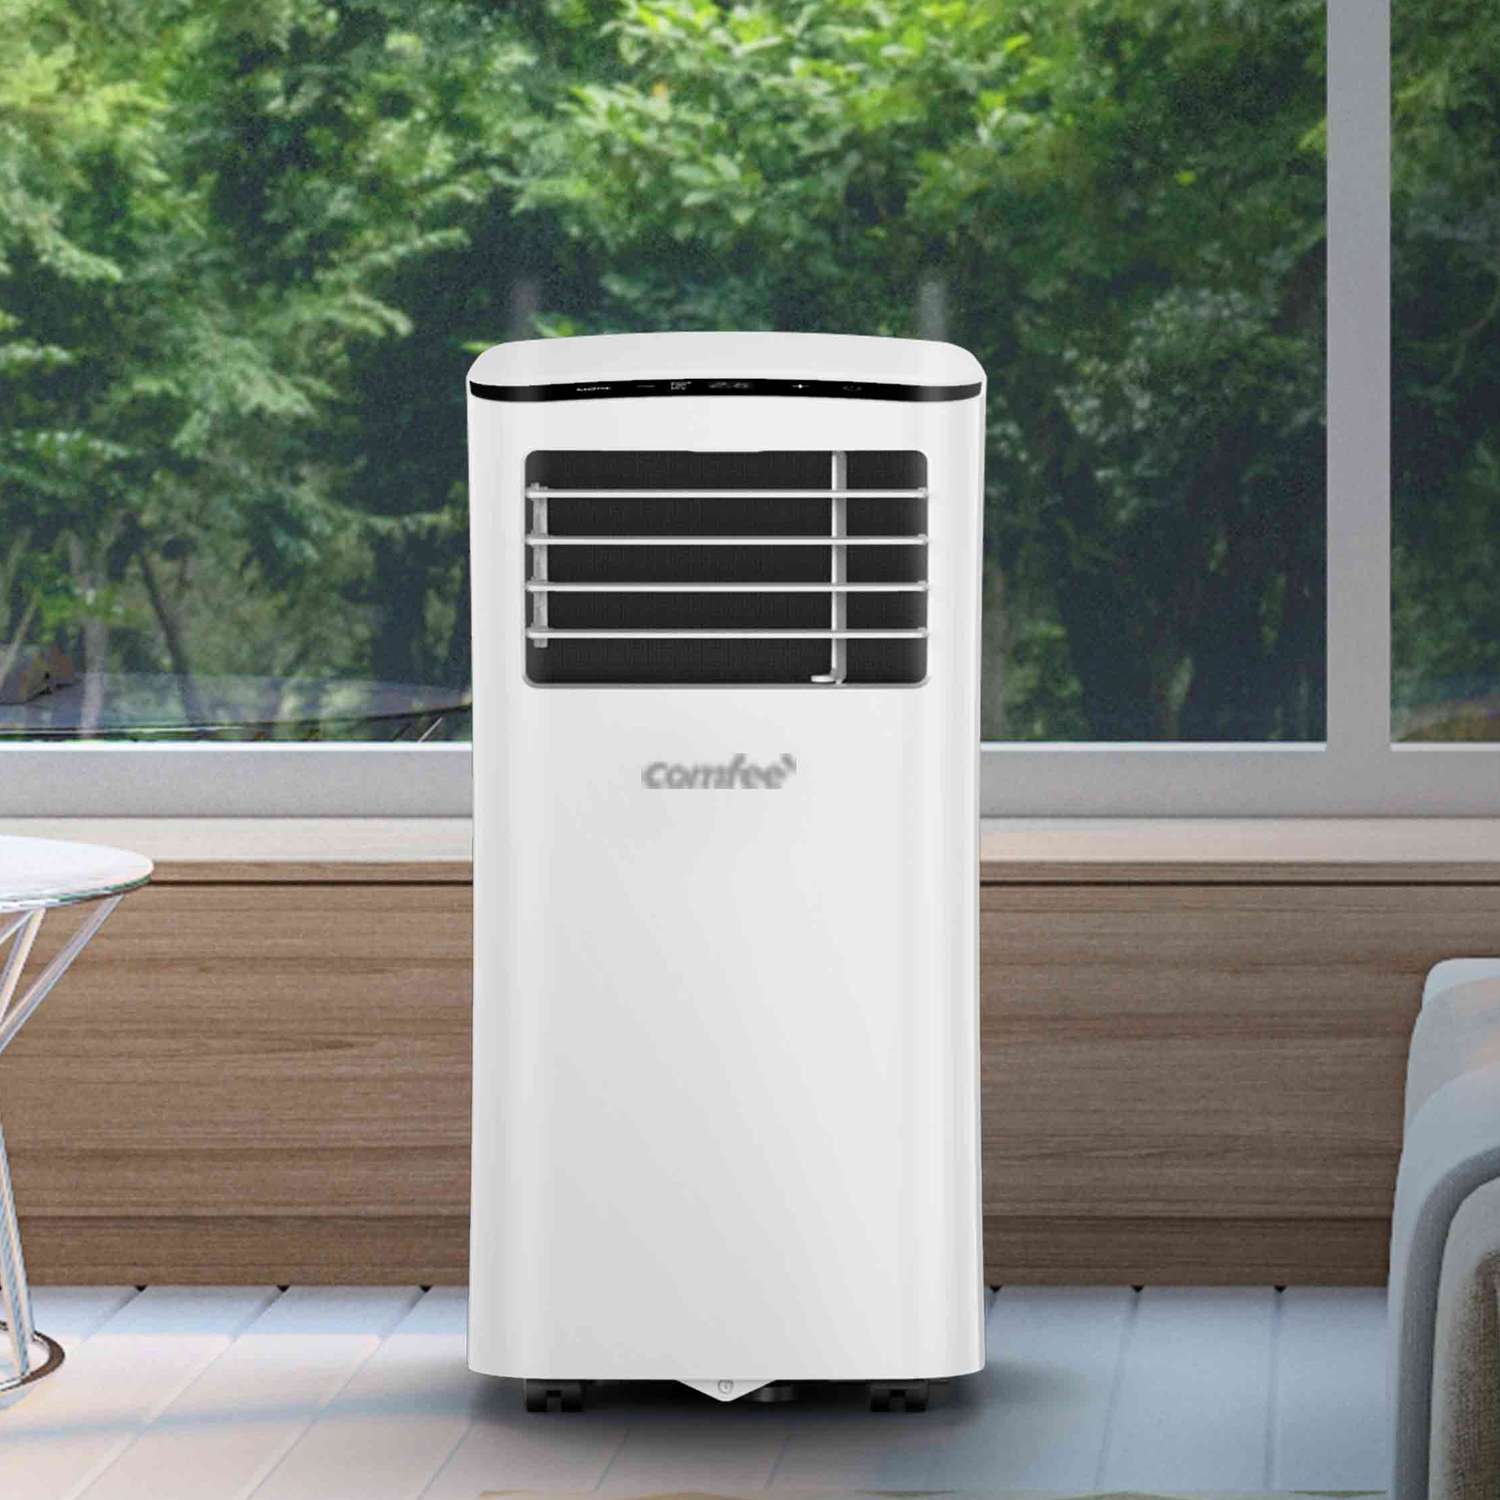 – Mobile Global Air Conditioner